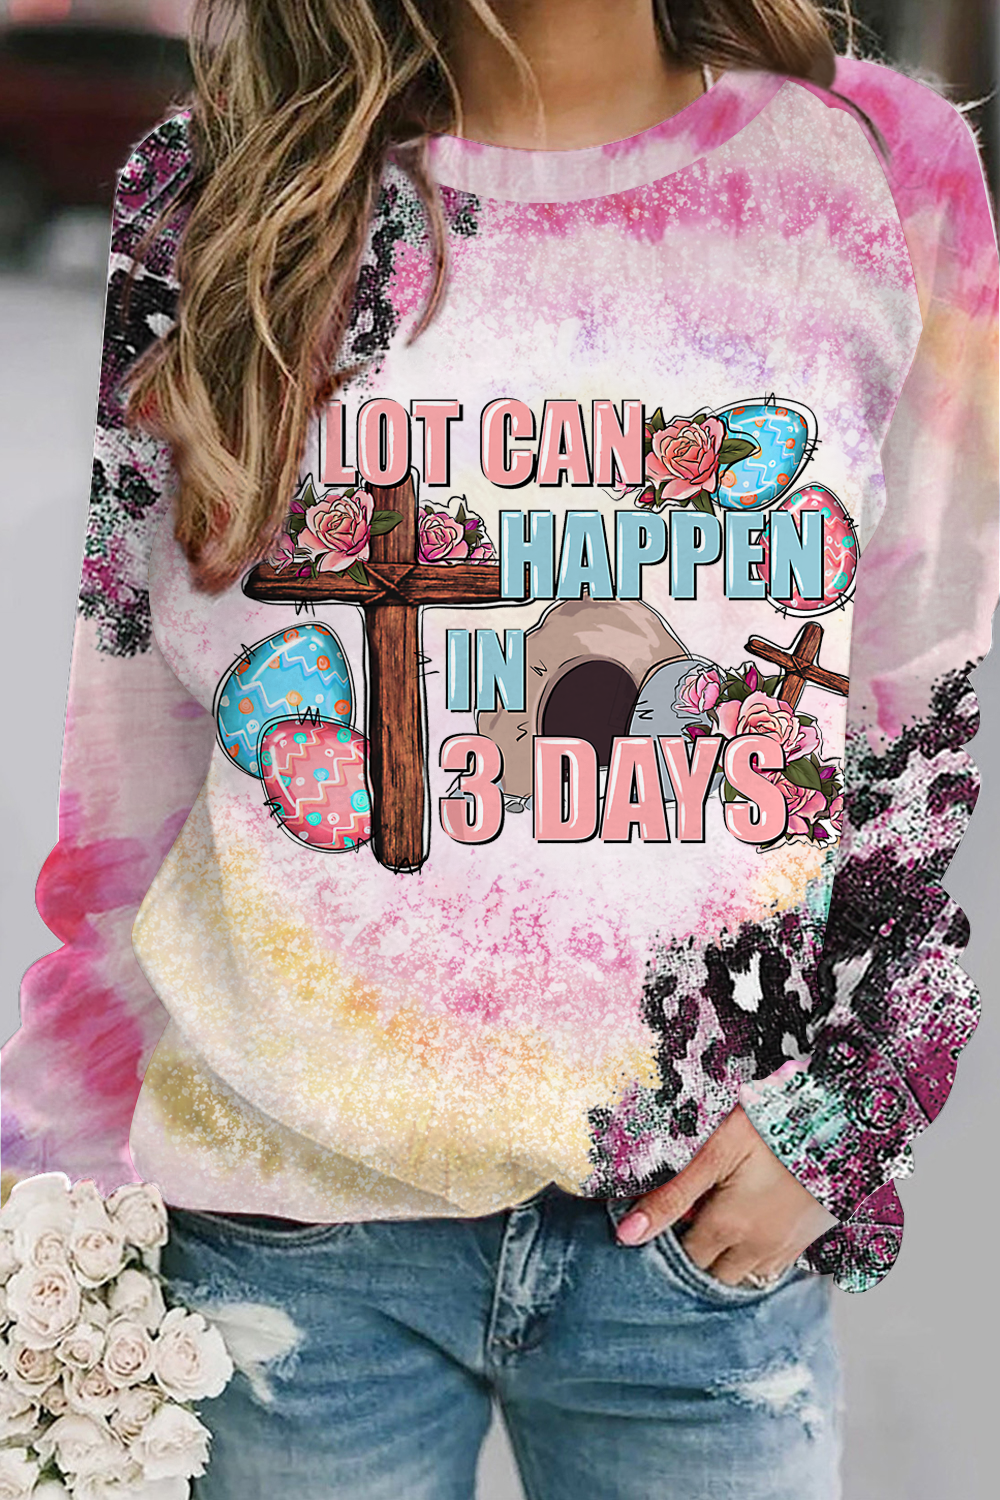 A Lot Can Happen In 3 Days Printed Sweatshirt